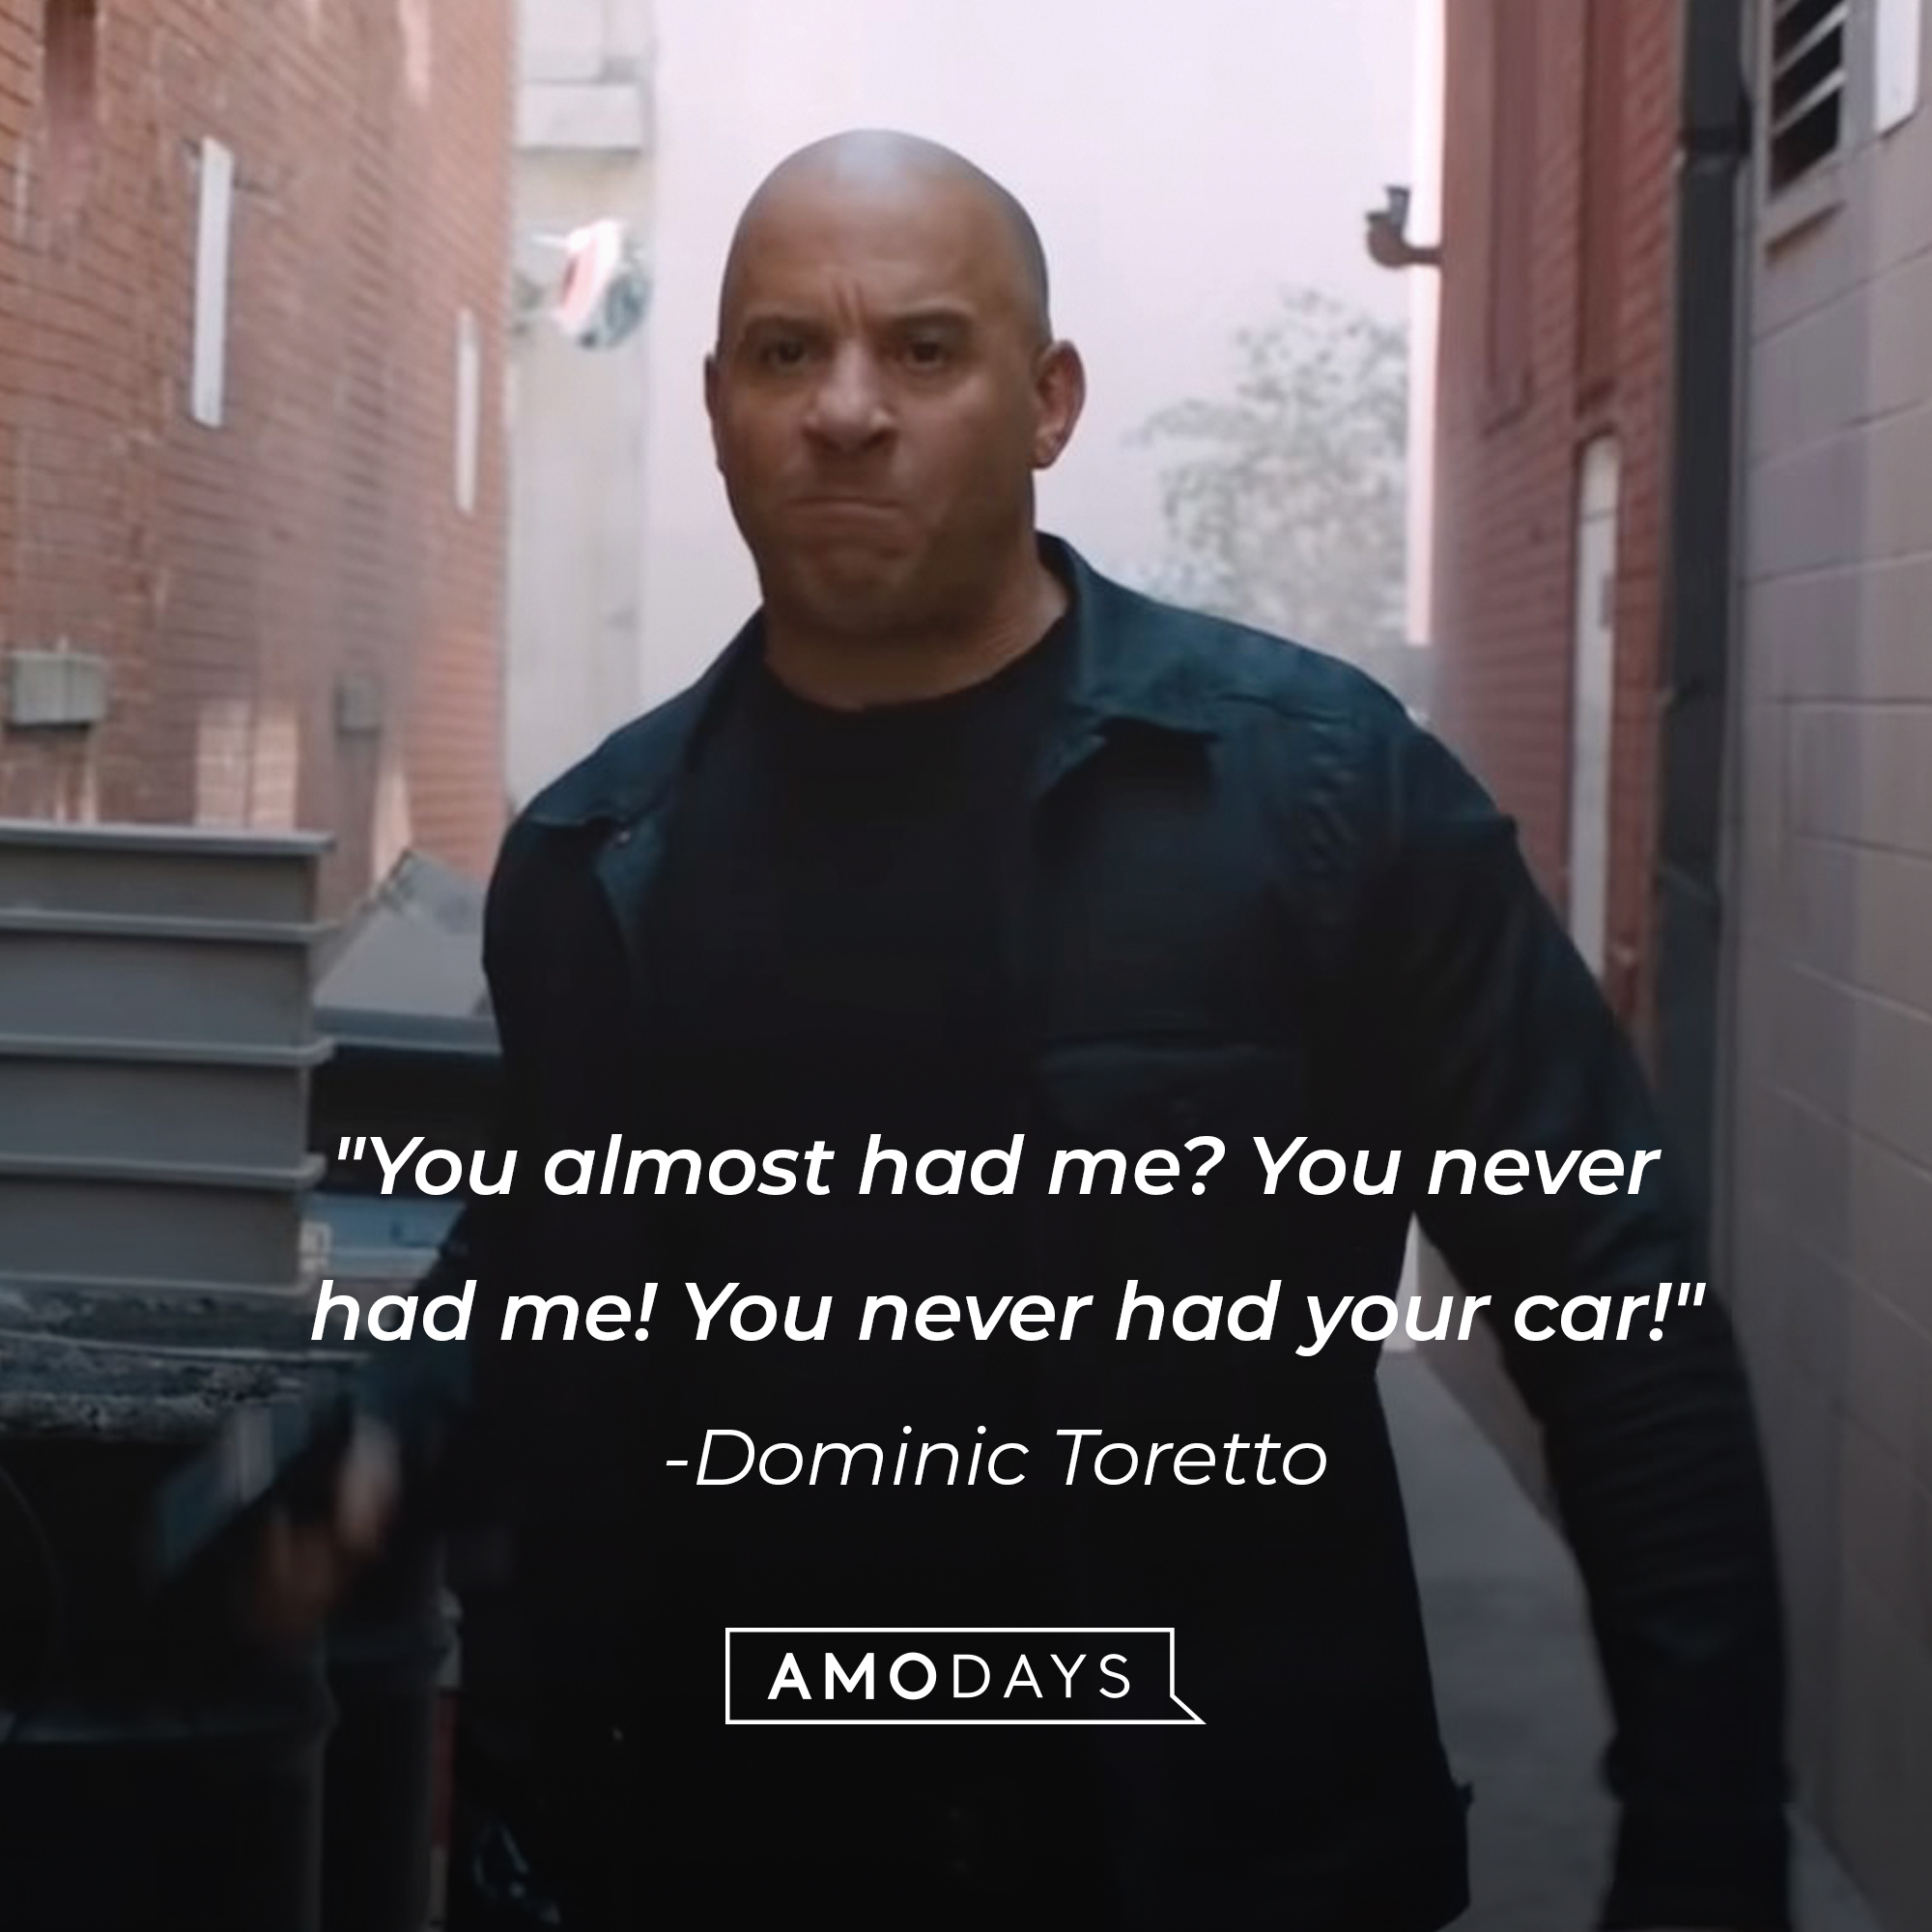 Dominic Toretto's quote: "You almost had me? You never had me! You never had your car!" | Source: facebook.com/TheFastSaga